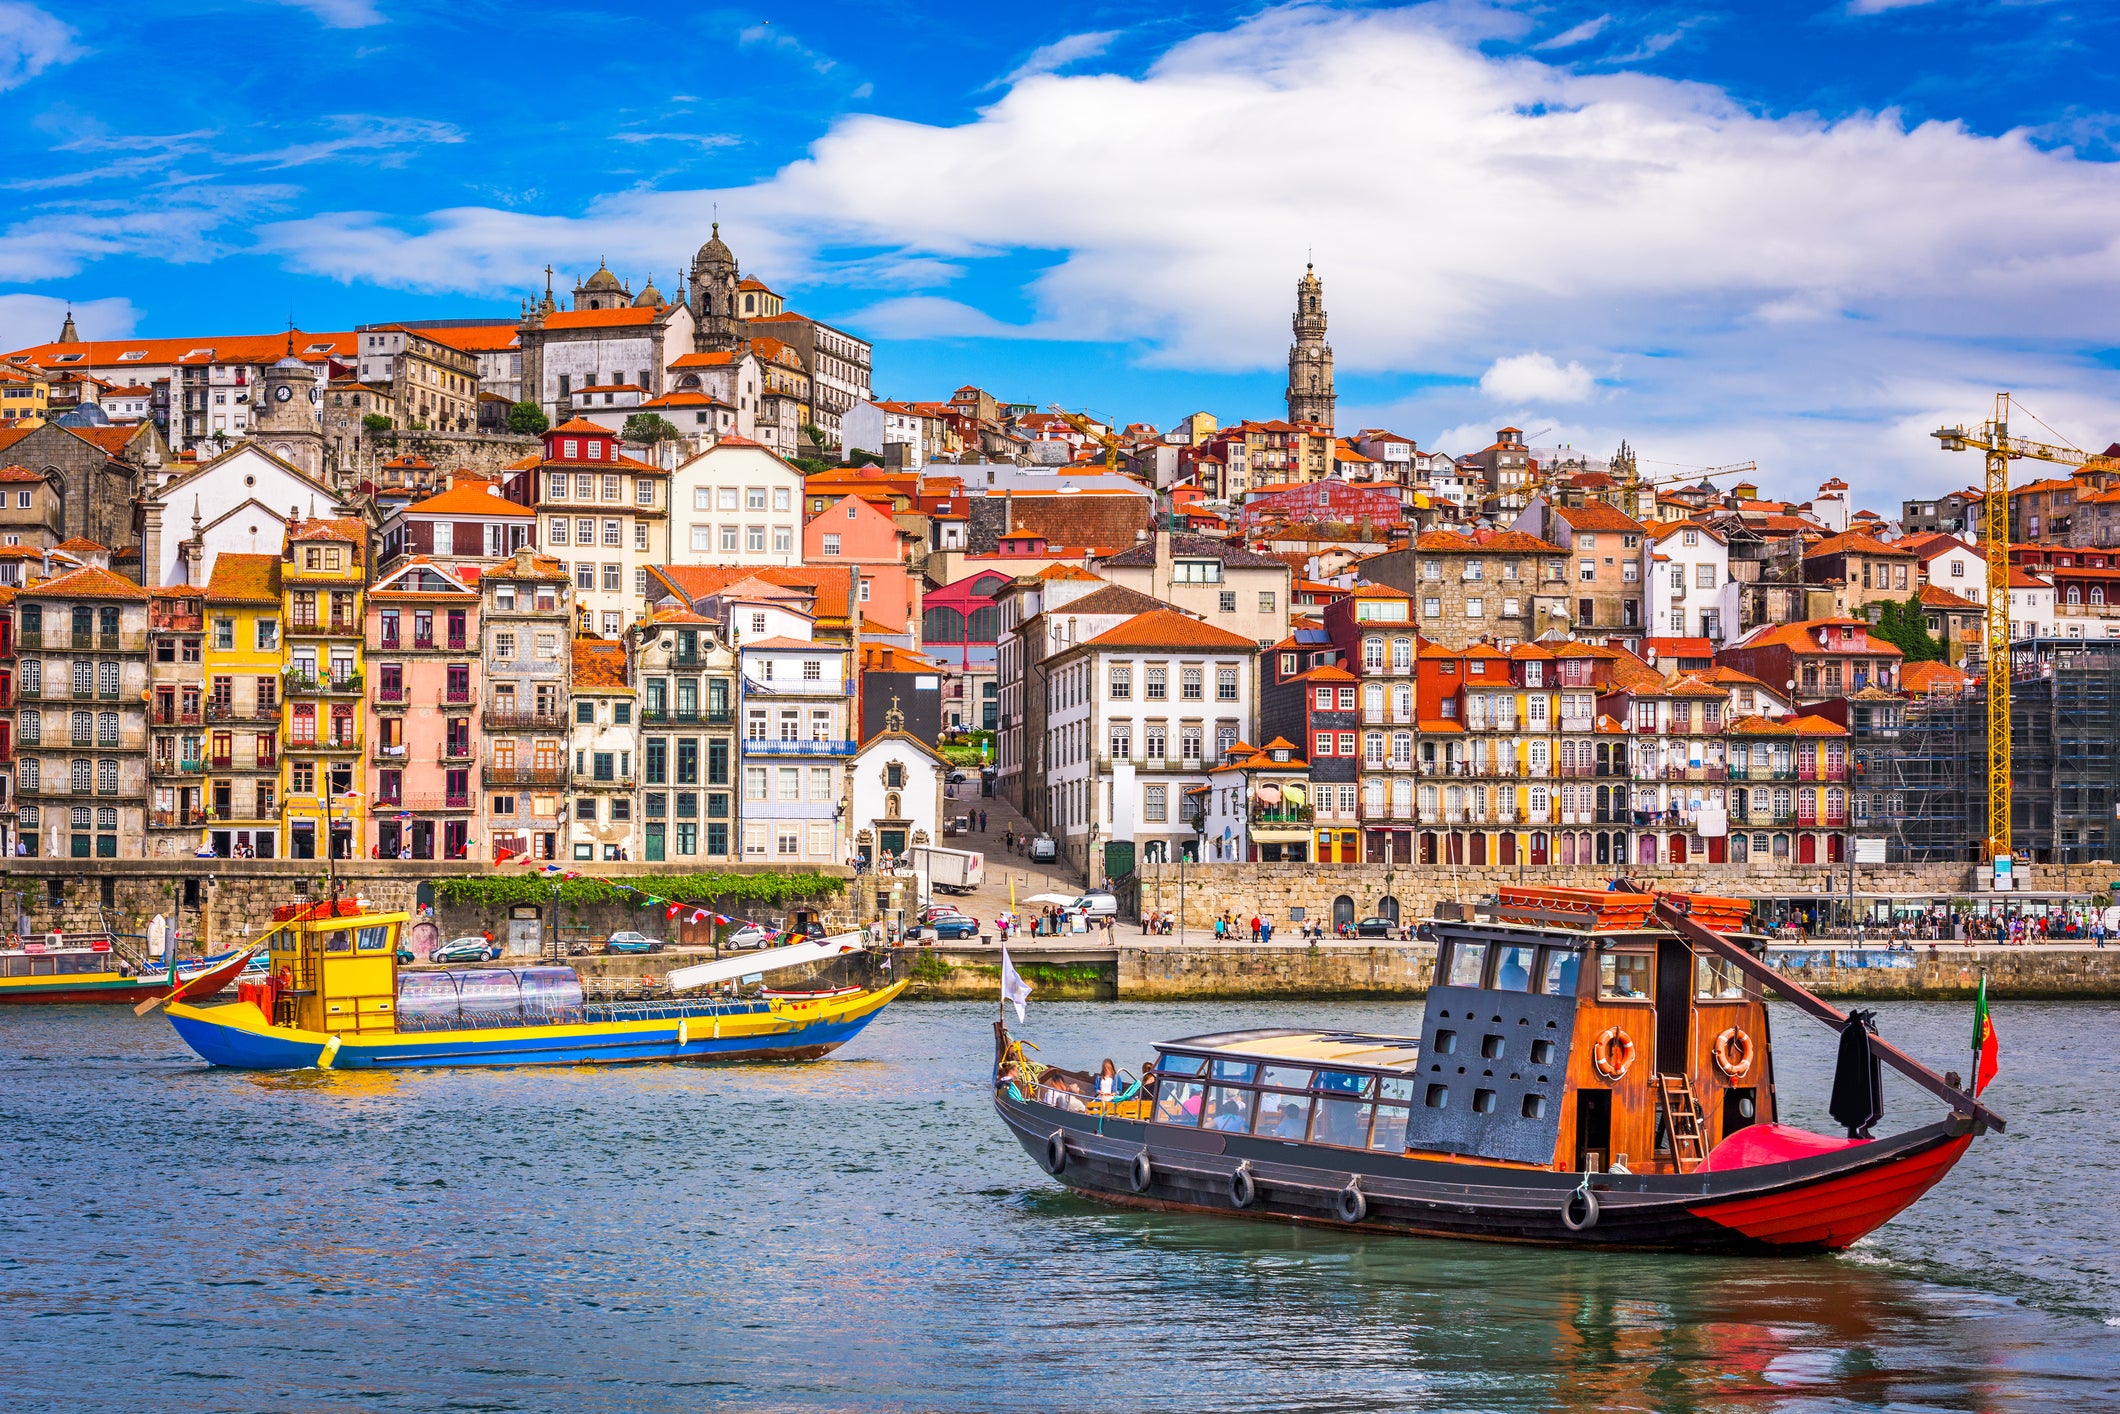 Visitors can eat and drink in fine style in Porto